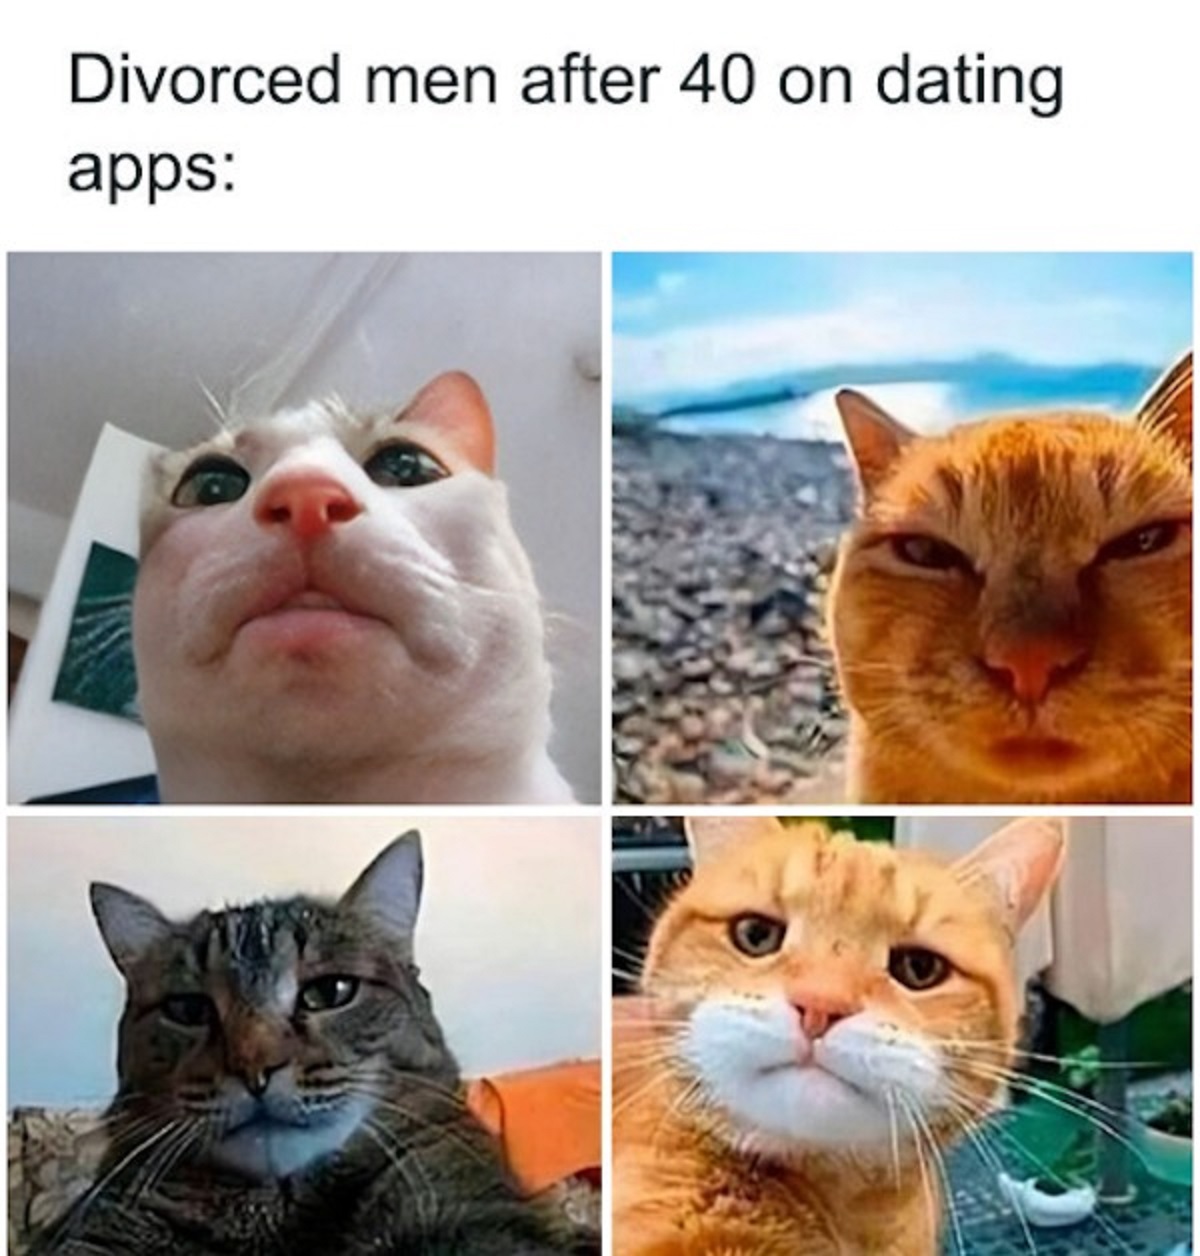 man 40 years old on dating apps - Divorced men after 40 on dating apps